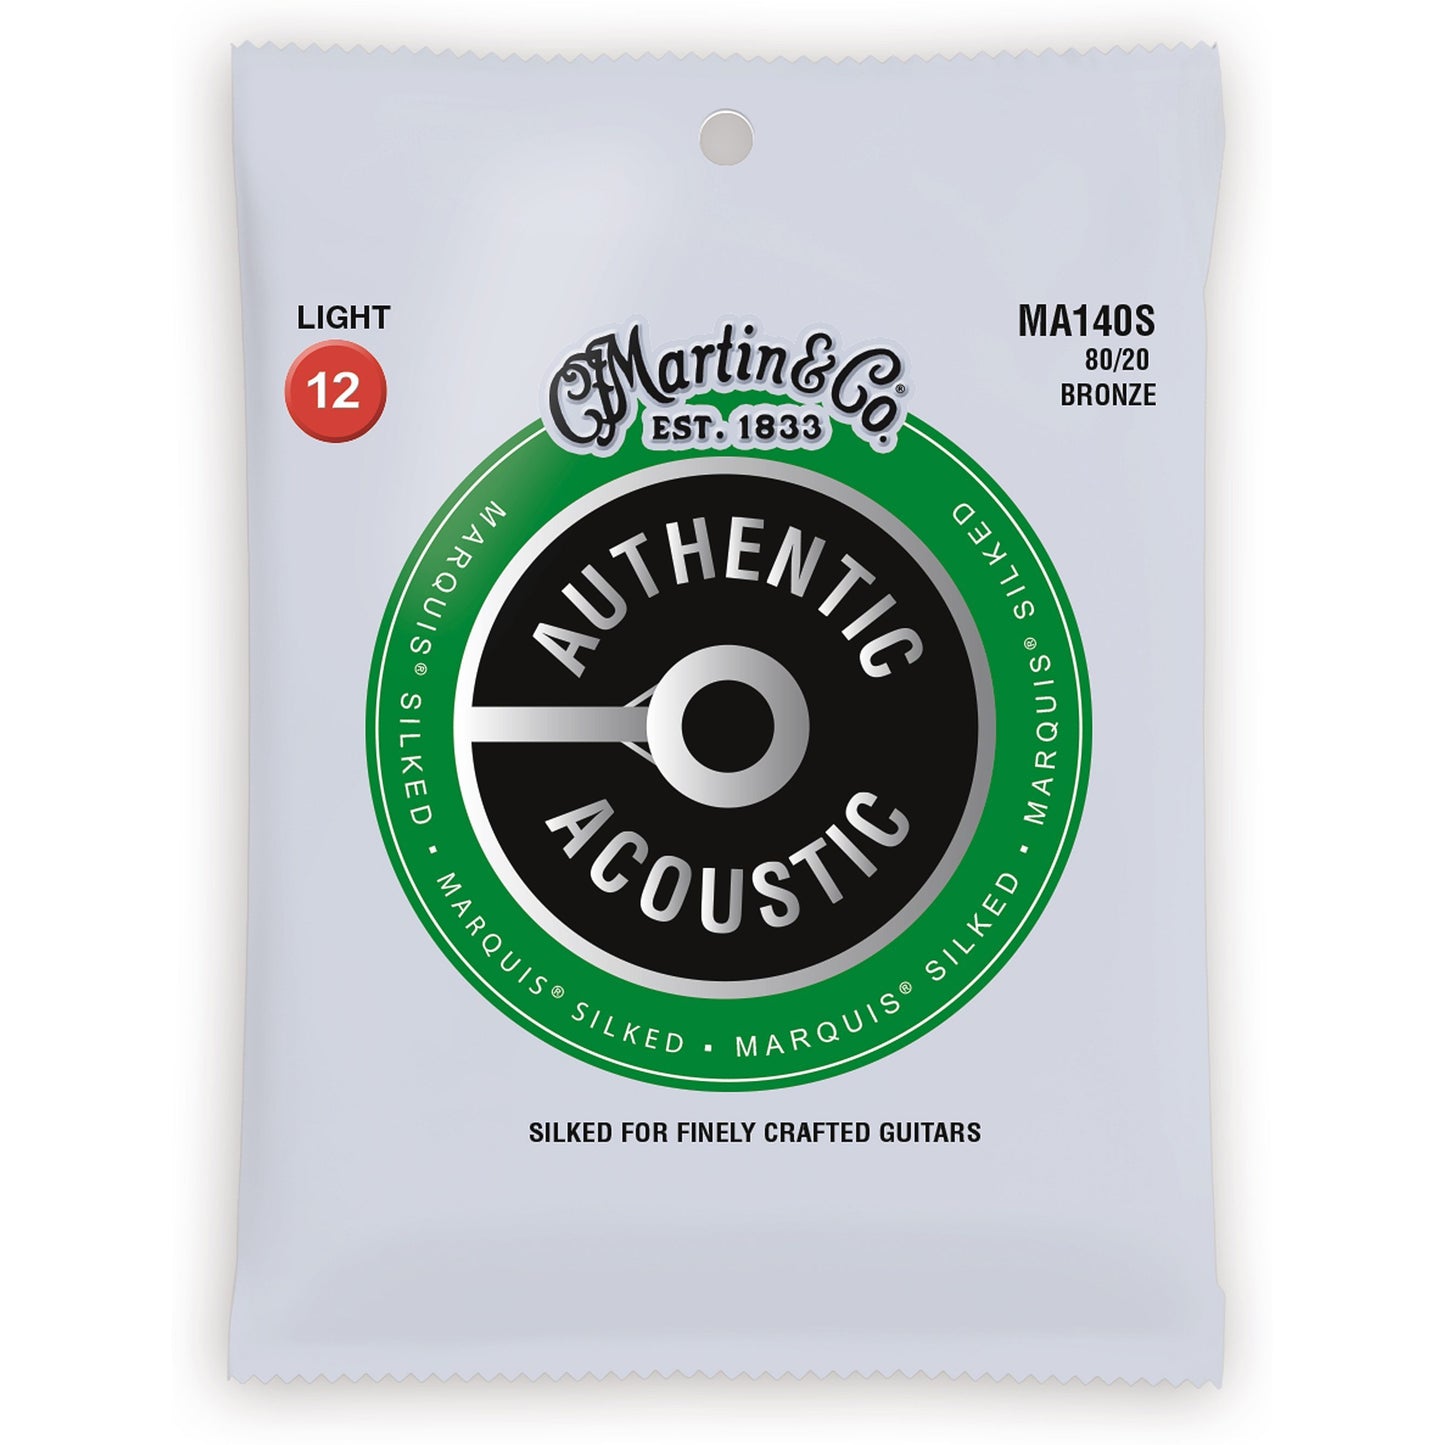 Martin Authentic Marquis Silked 80/20 Bronze Acoustic Guitar Strings, MA140S, Light